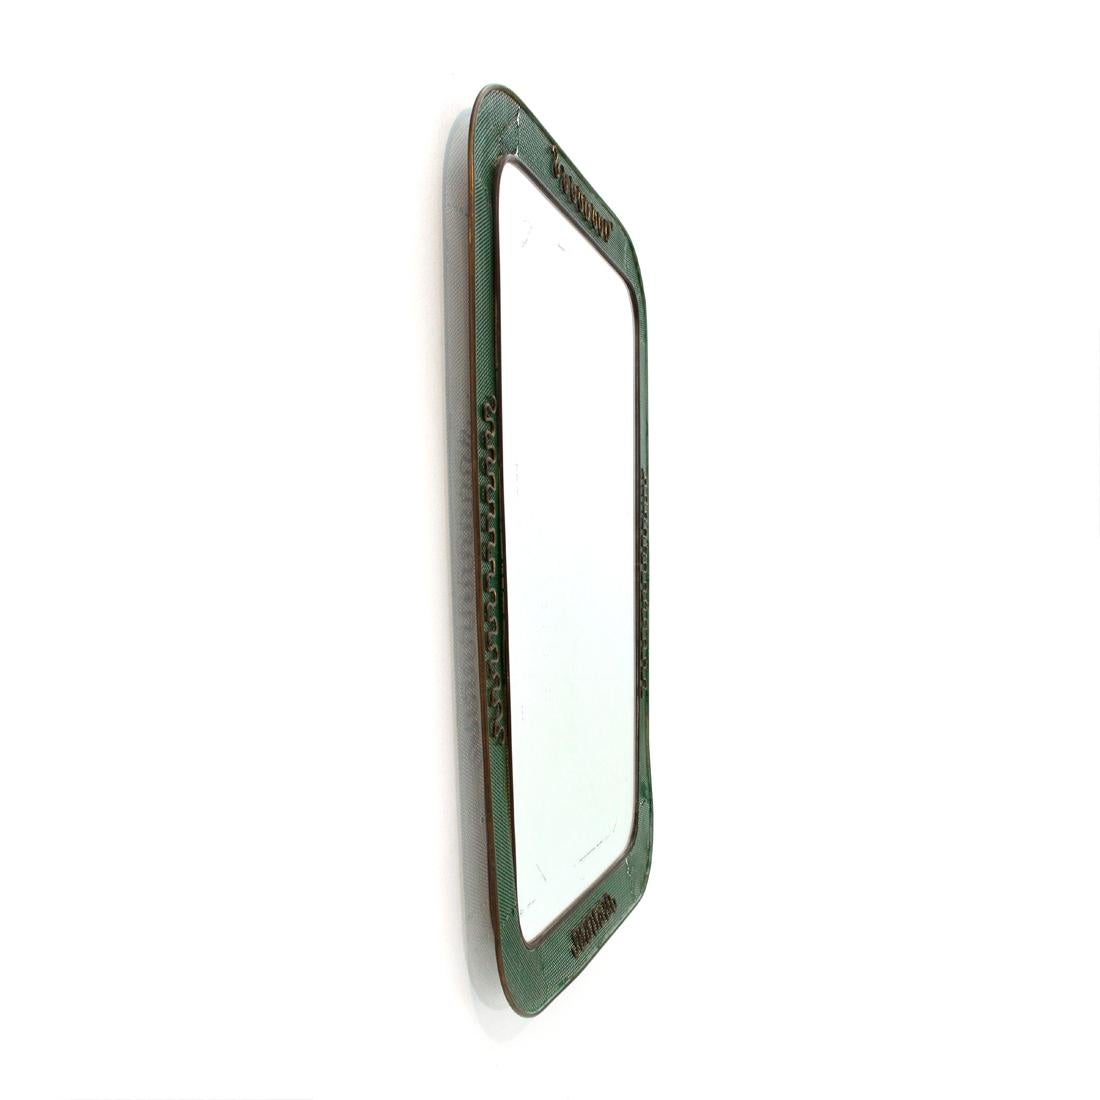 Italian manufacturing mirror produced in the 1950s.
Frame in brass and perforated green painted metal.
Decorative brass serpentine.
Mirrored glass.
back in wood.
Structure in good condition, some signs due to normal use over